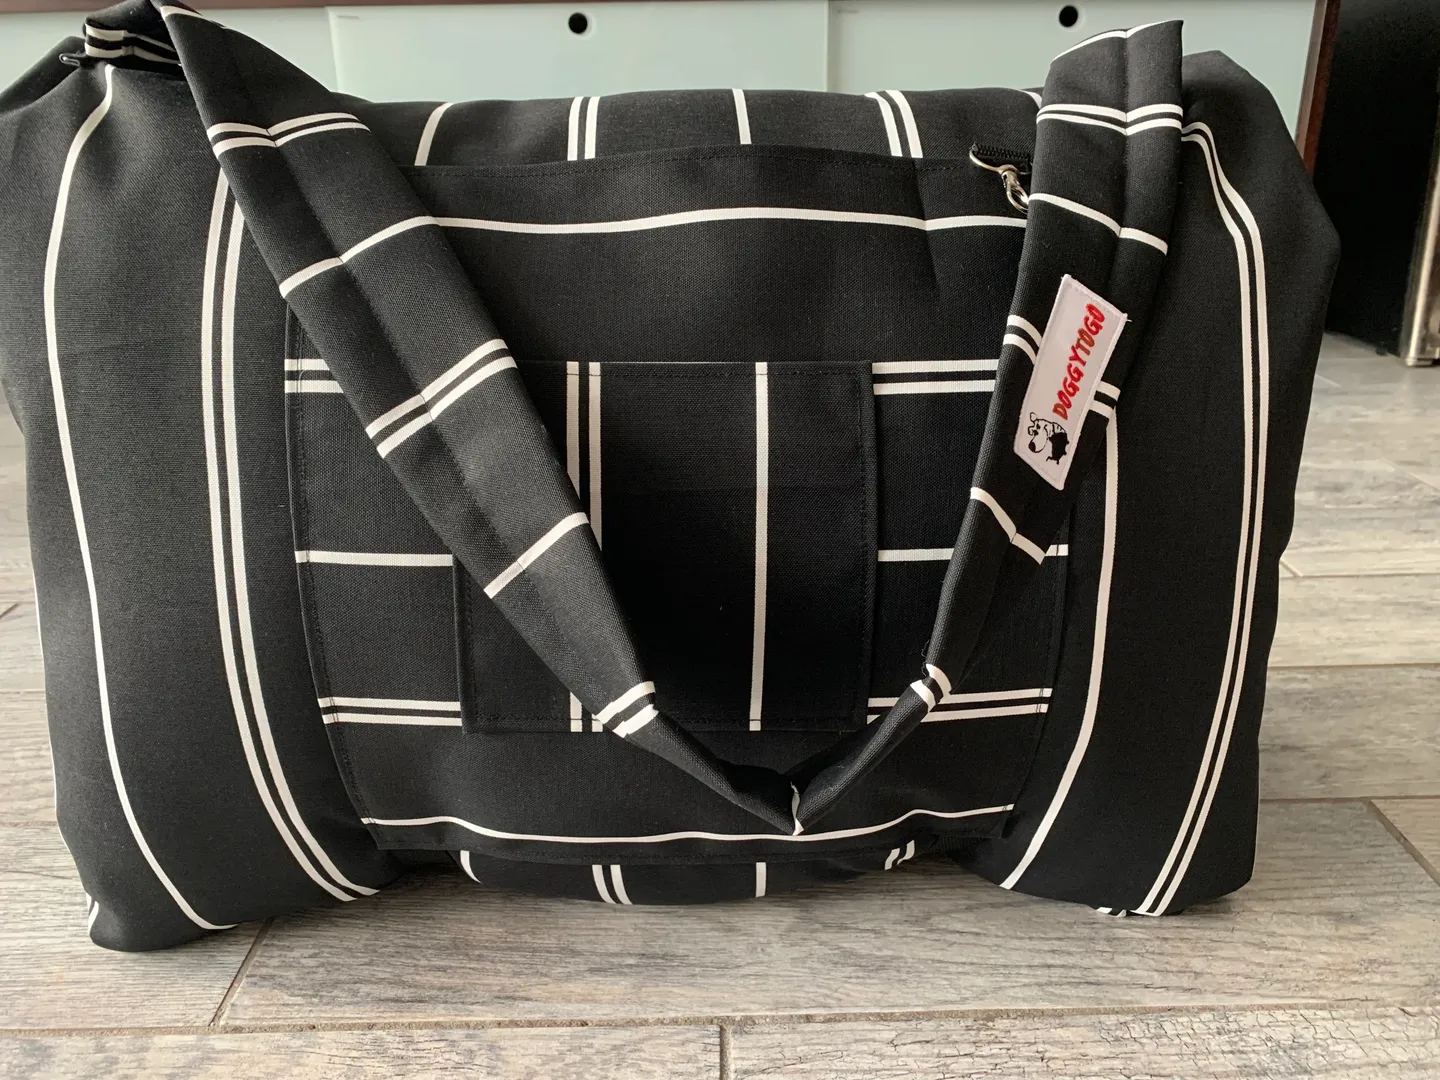 A black dog bed bag with white stripes